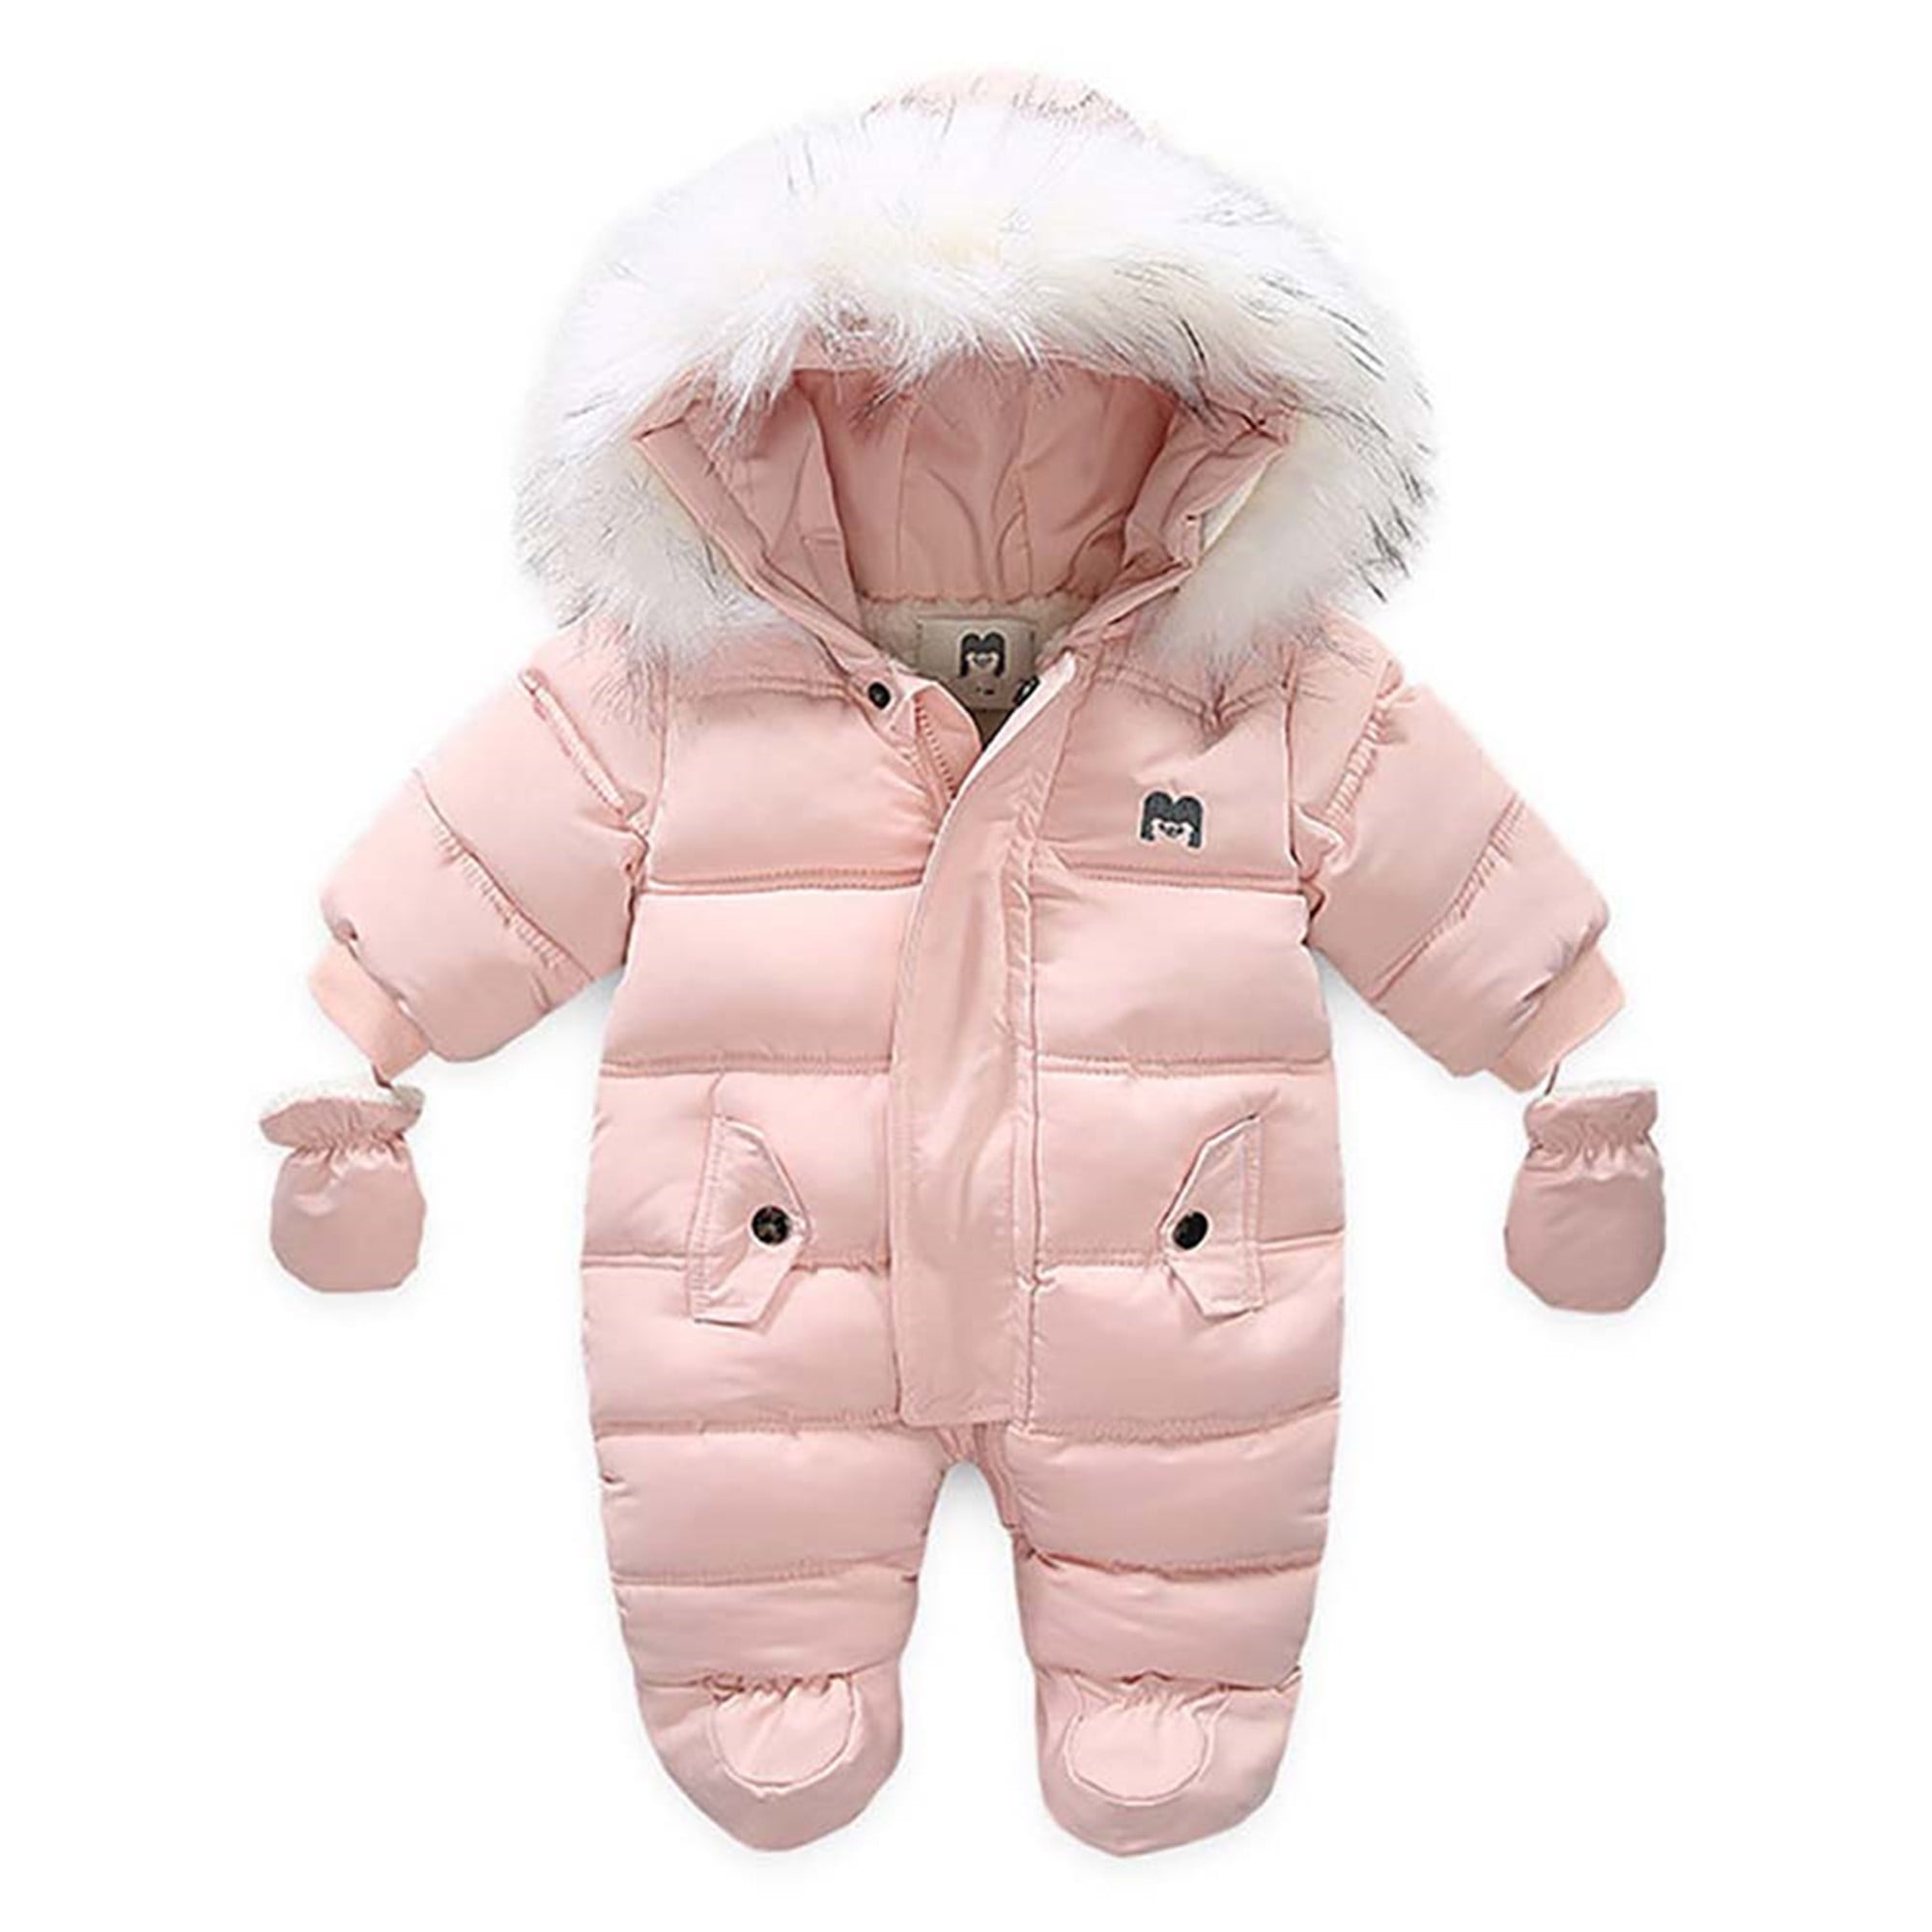 Simplee kids Baby Infant Boys Girls Snowsuit Winter Hooded Footed Warm Jumpsuit Outerwear with Gloves for 3-24 Months 